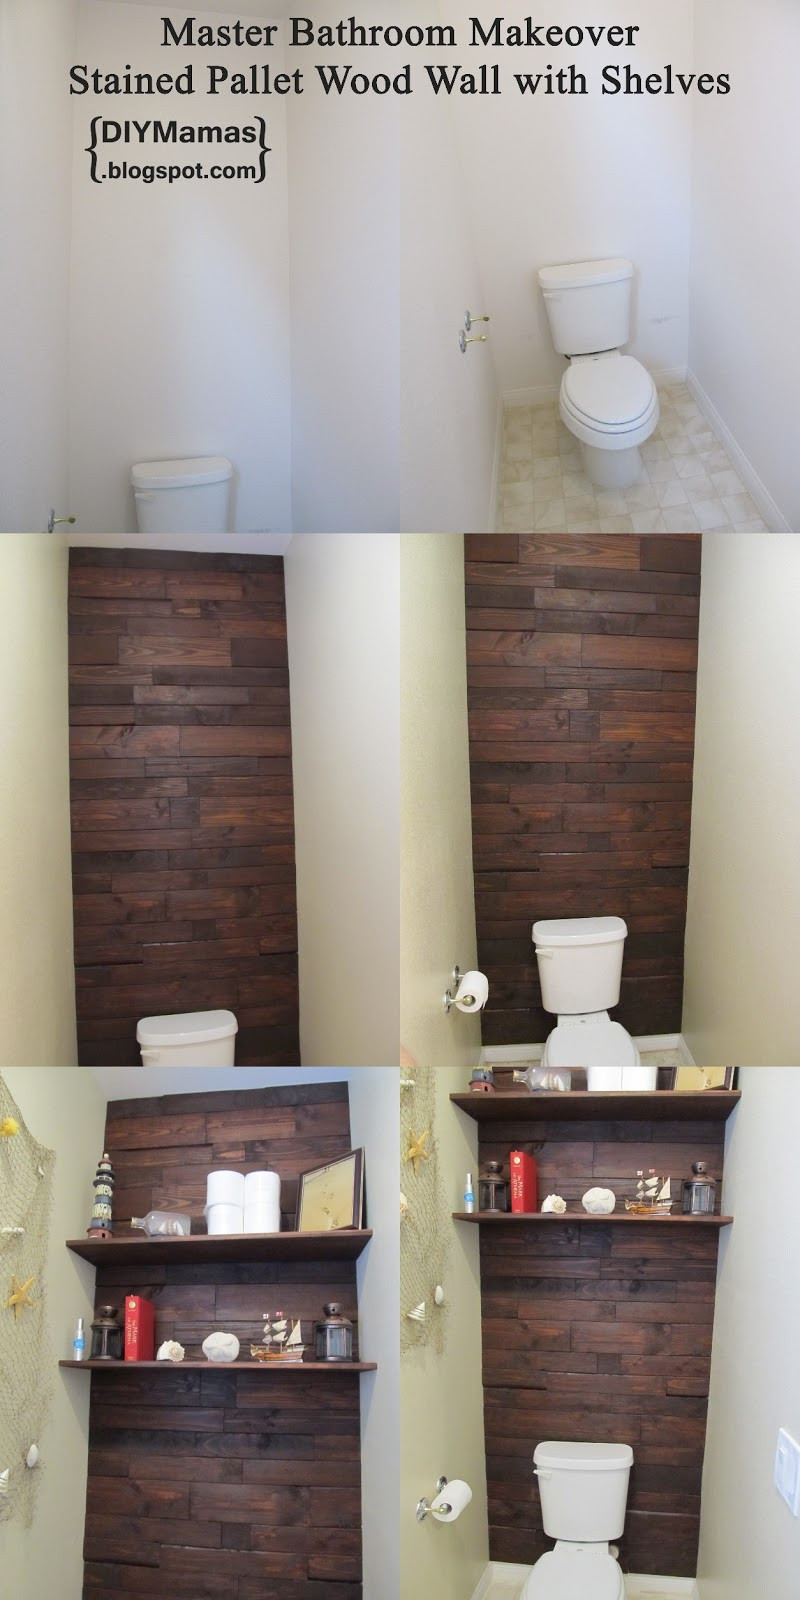 Pallet Wall Bathroom
 DIY Mamas Master Bathroom Makeover Stained Pallet Wood